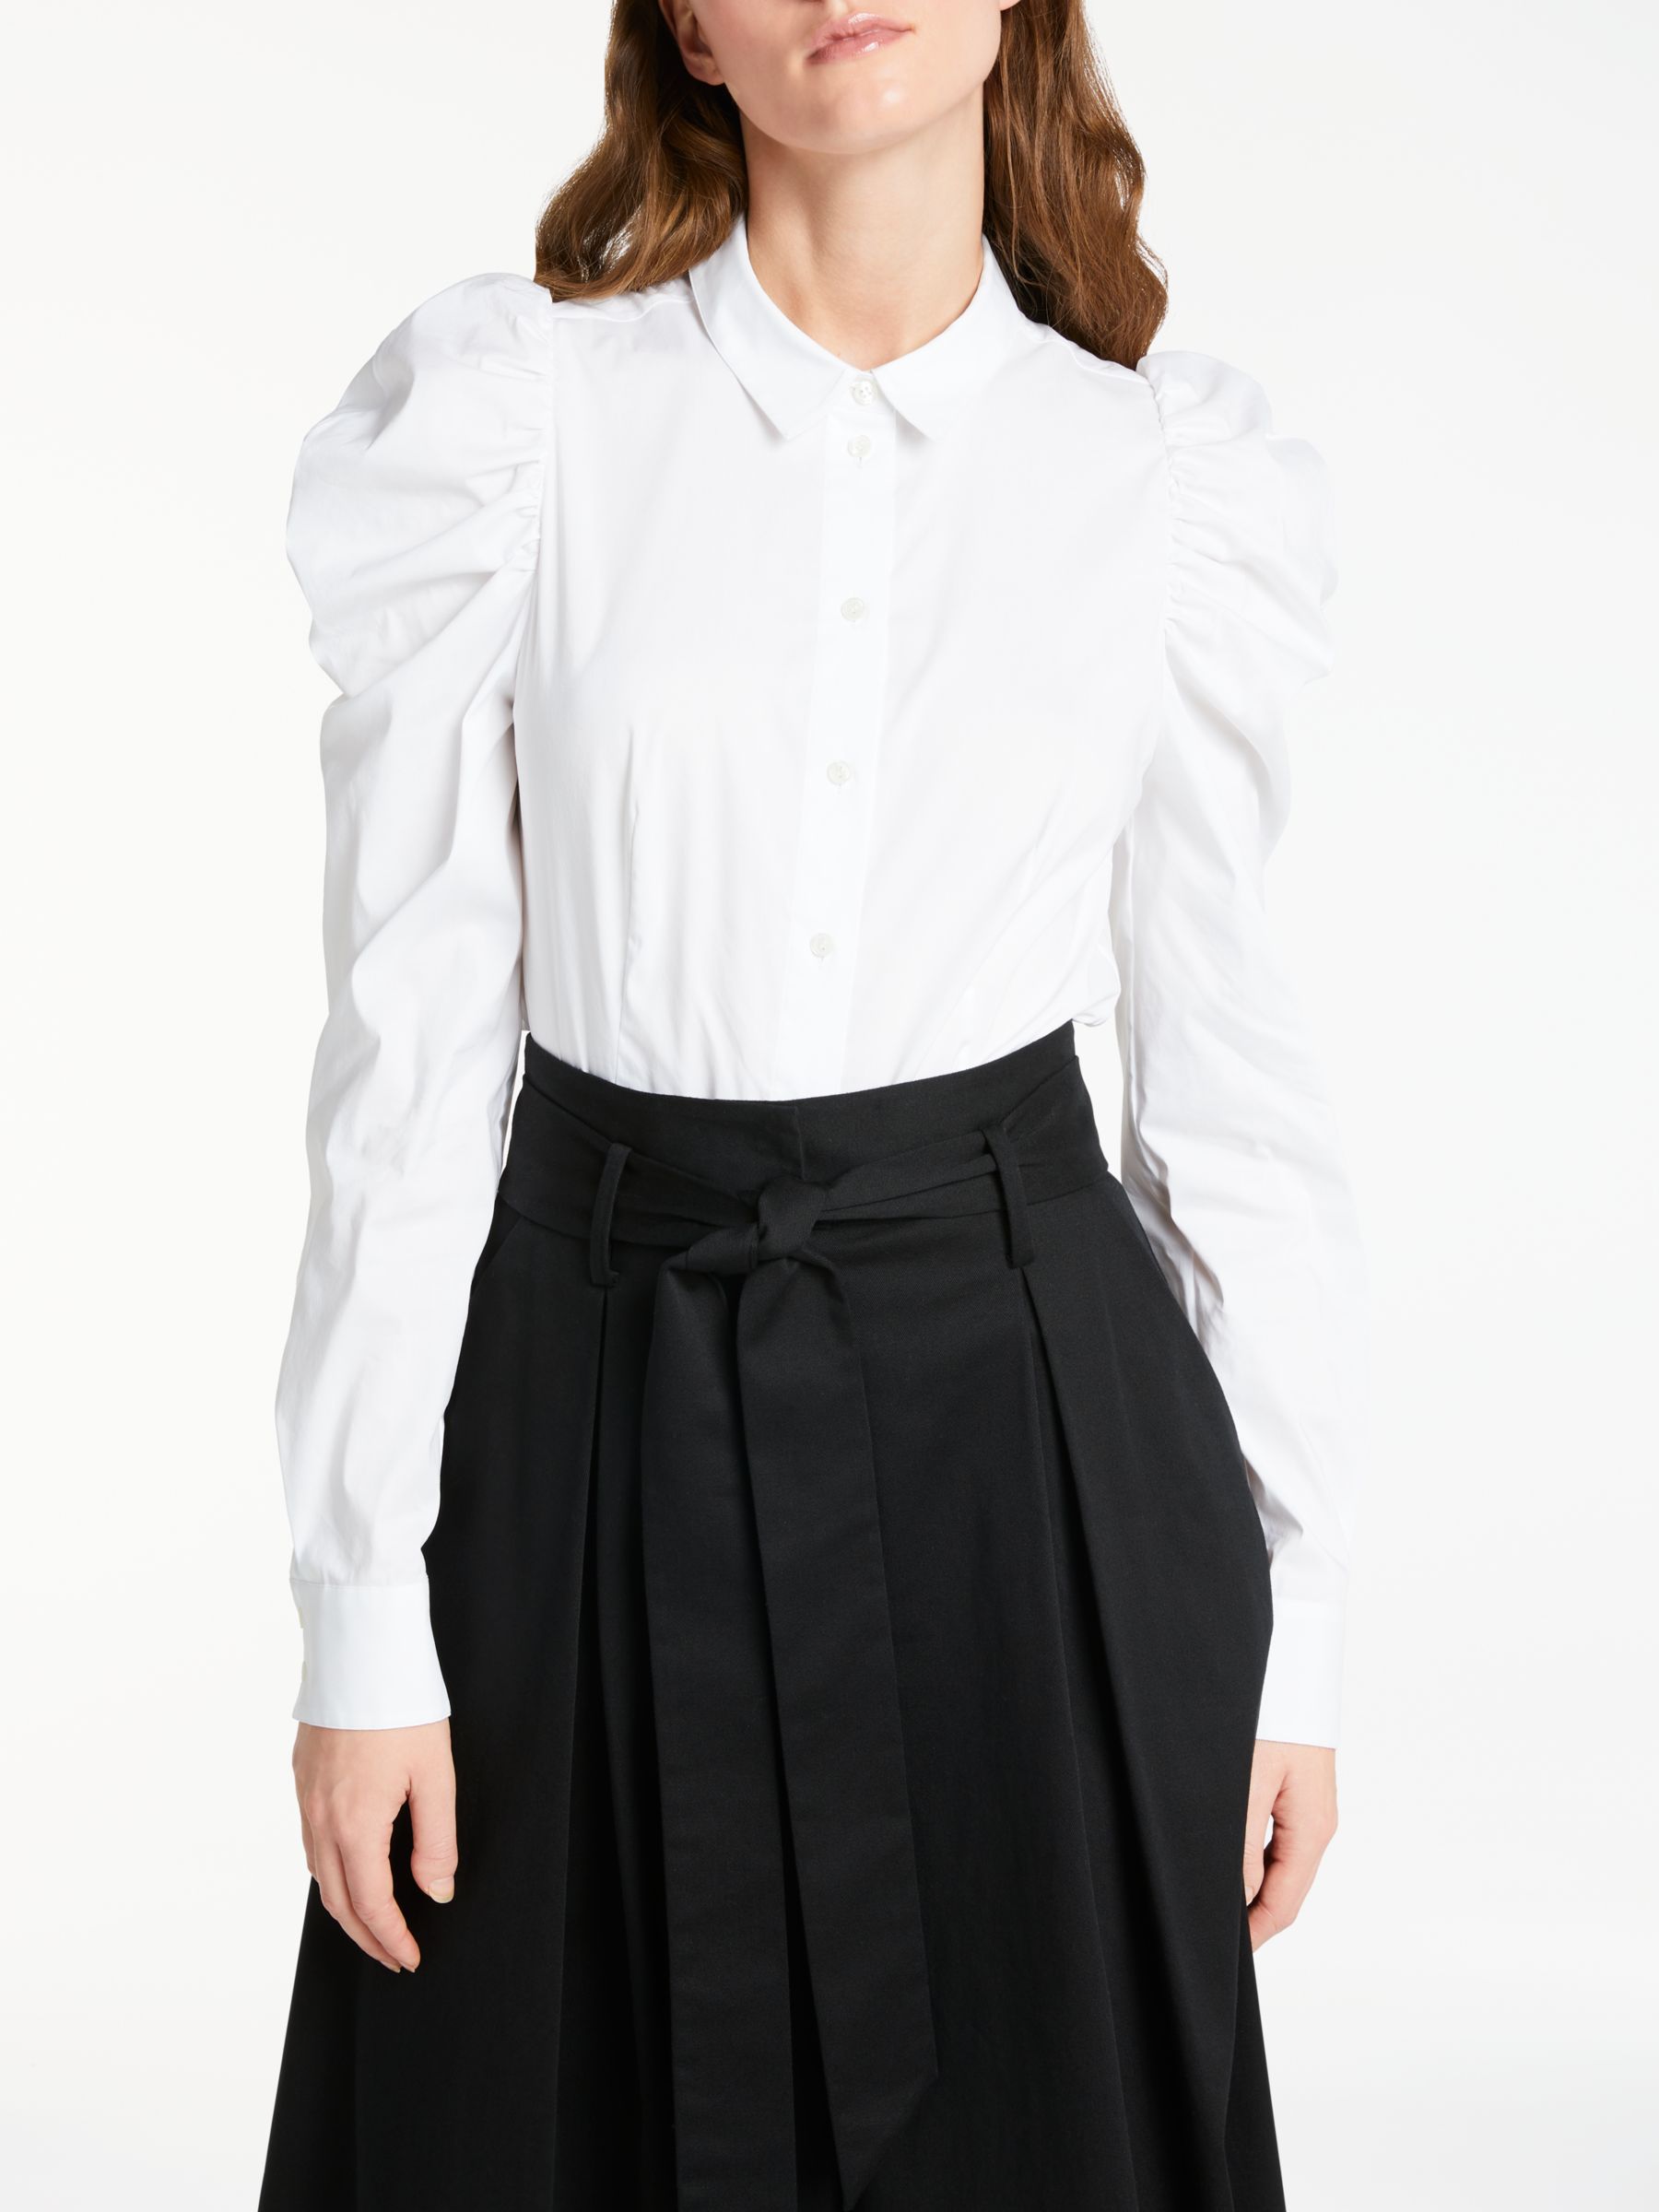 Somerset by Alice Temperley Ruched Sleeve Poplin Shirt, White